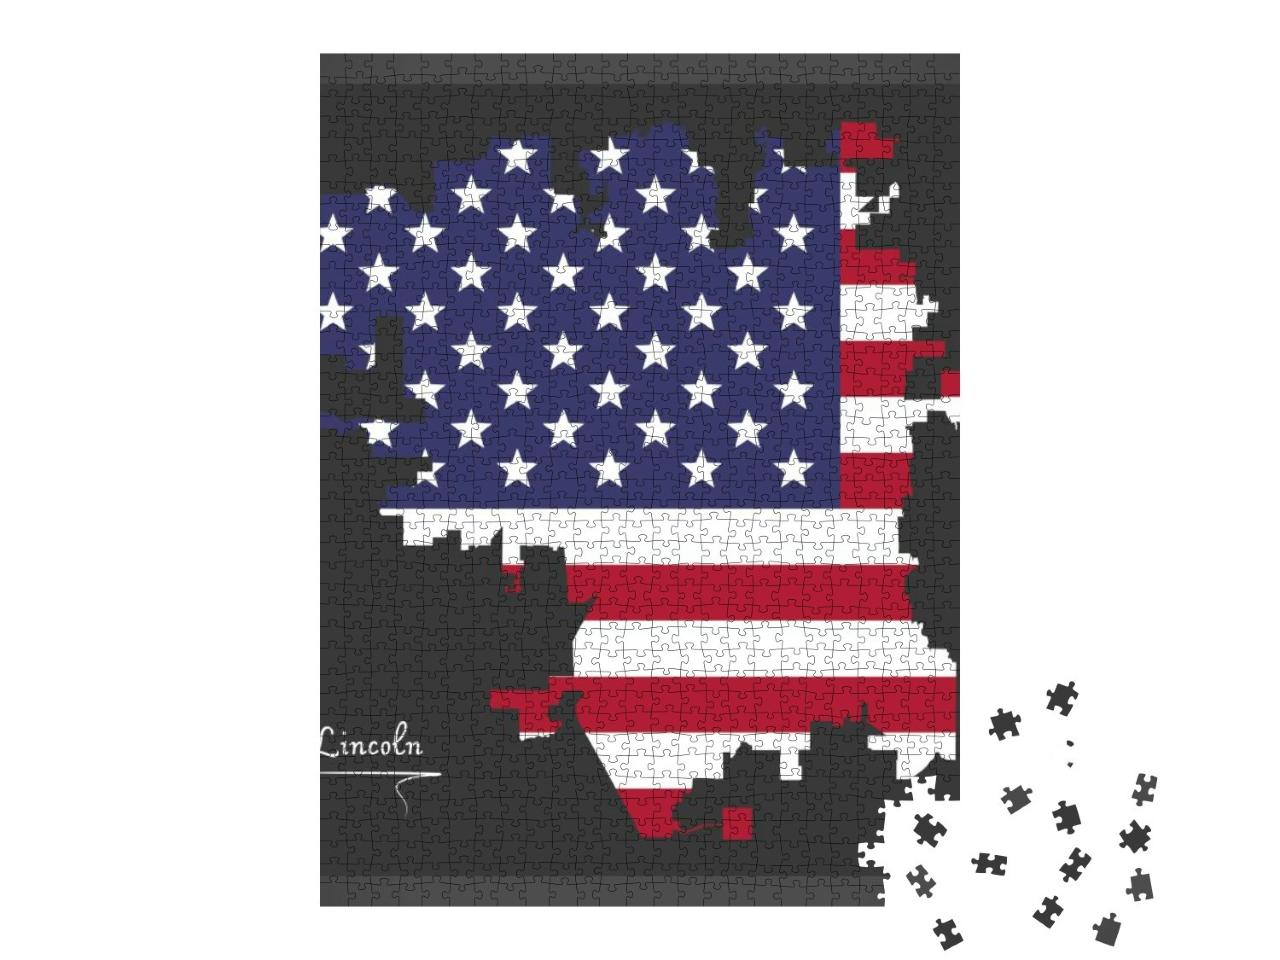 Lincoln Nebraska Map with American National Flag Illustra... Jigsaw Puzzle with 1000 pieces